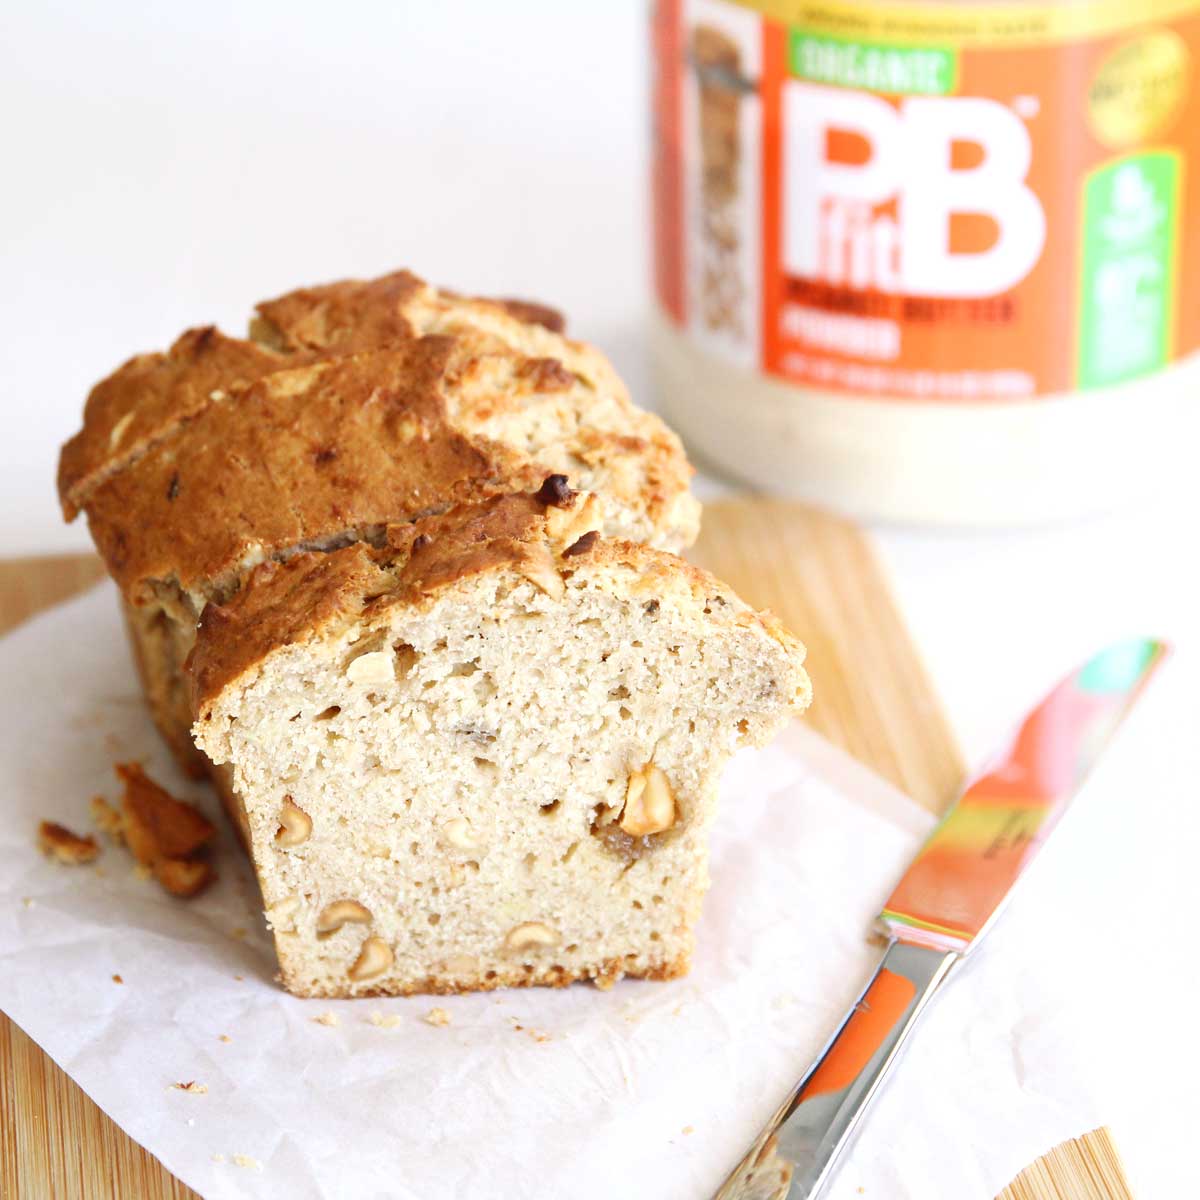 High Protein PB Fit Peanut Butter Banana Bread (Dairy Free, Egg Free Recipe)